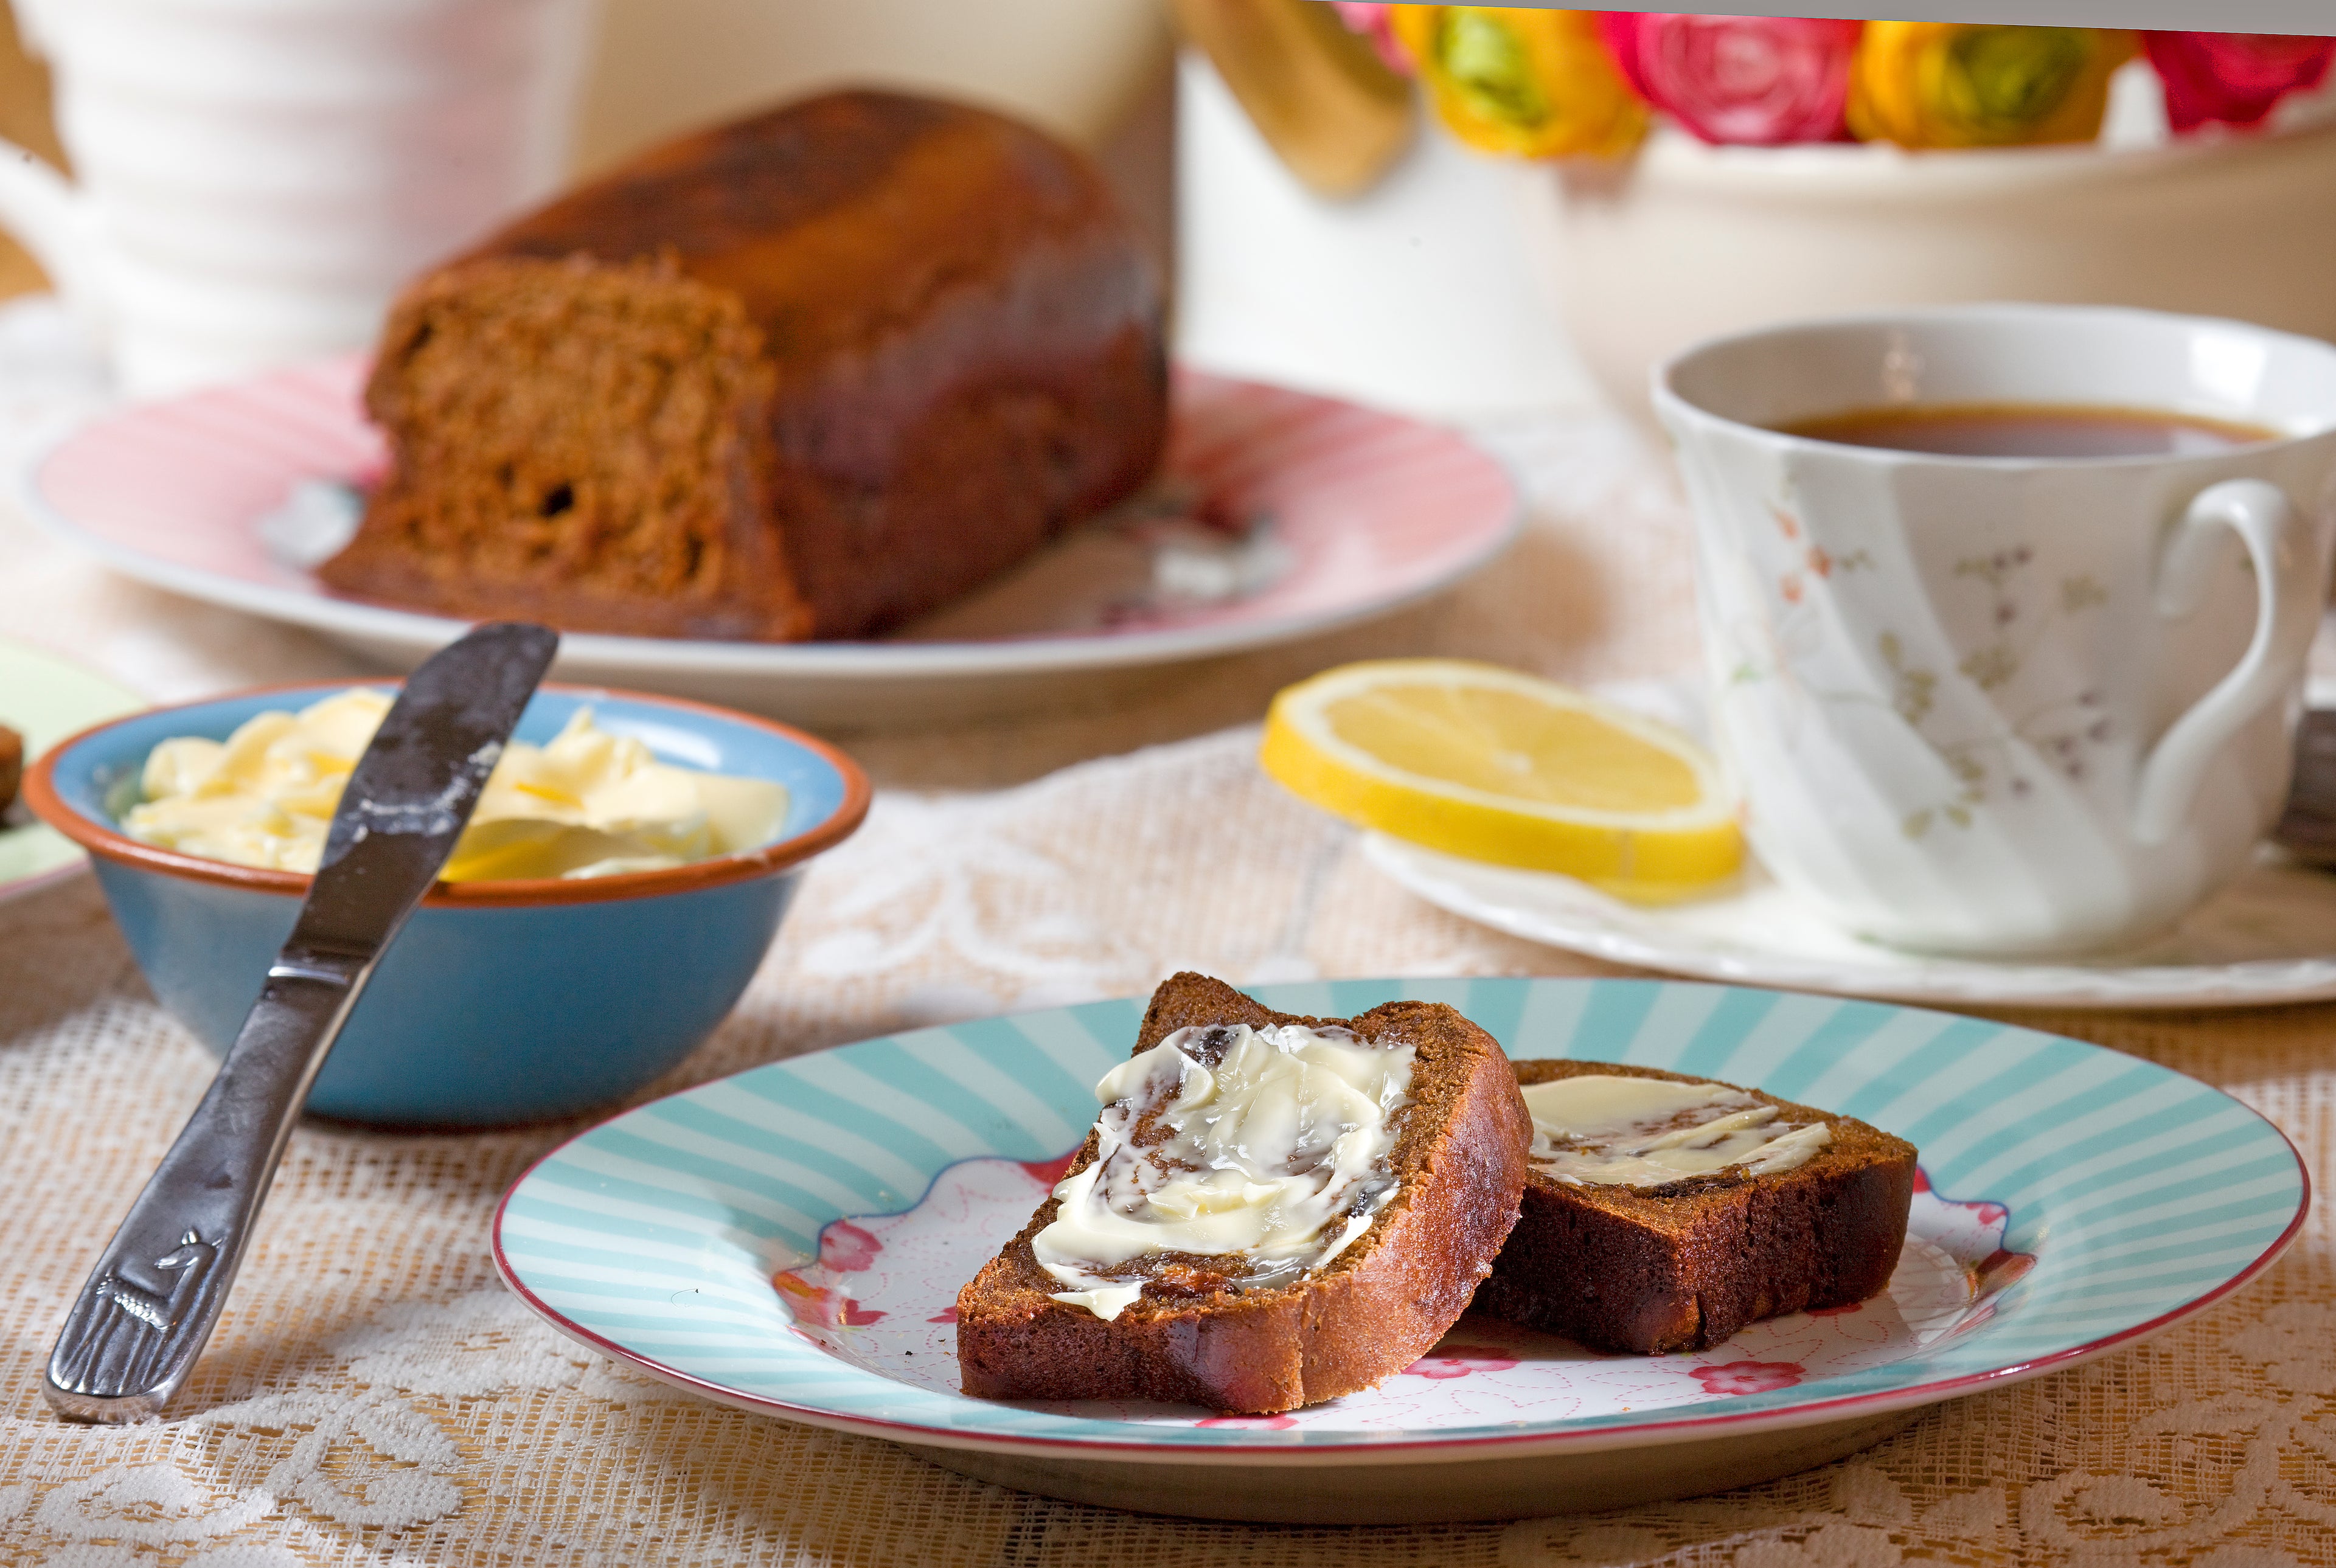 Slices of homemade malt loaf covered with butter on a blue and white plate